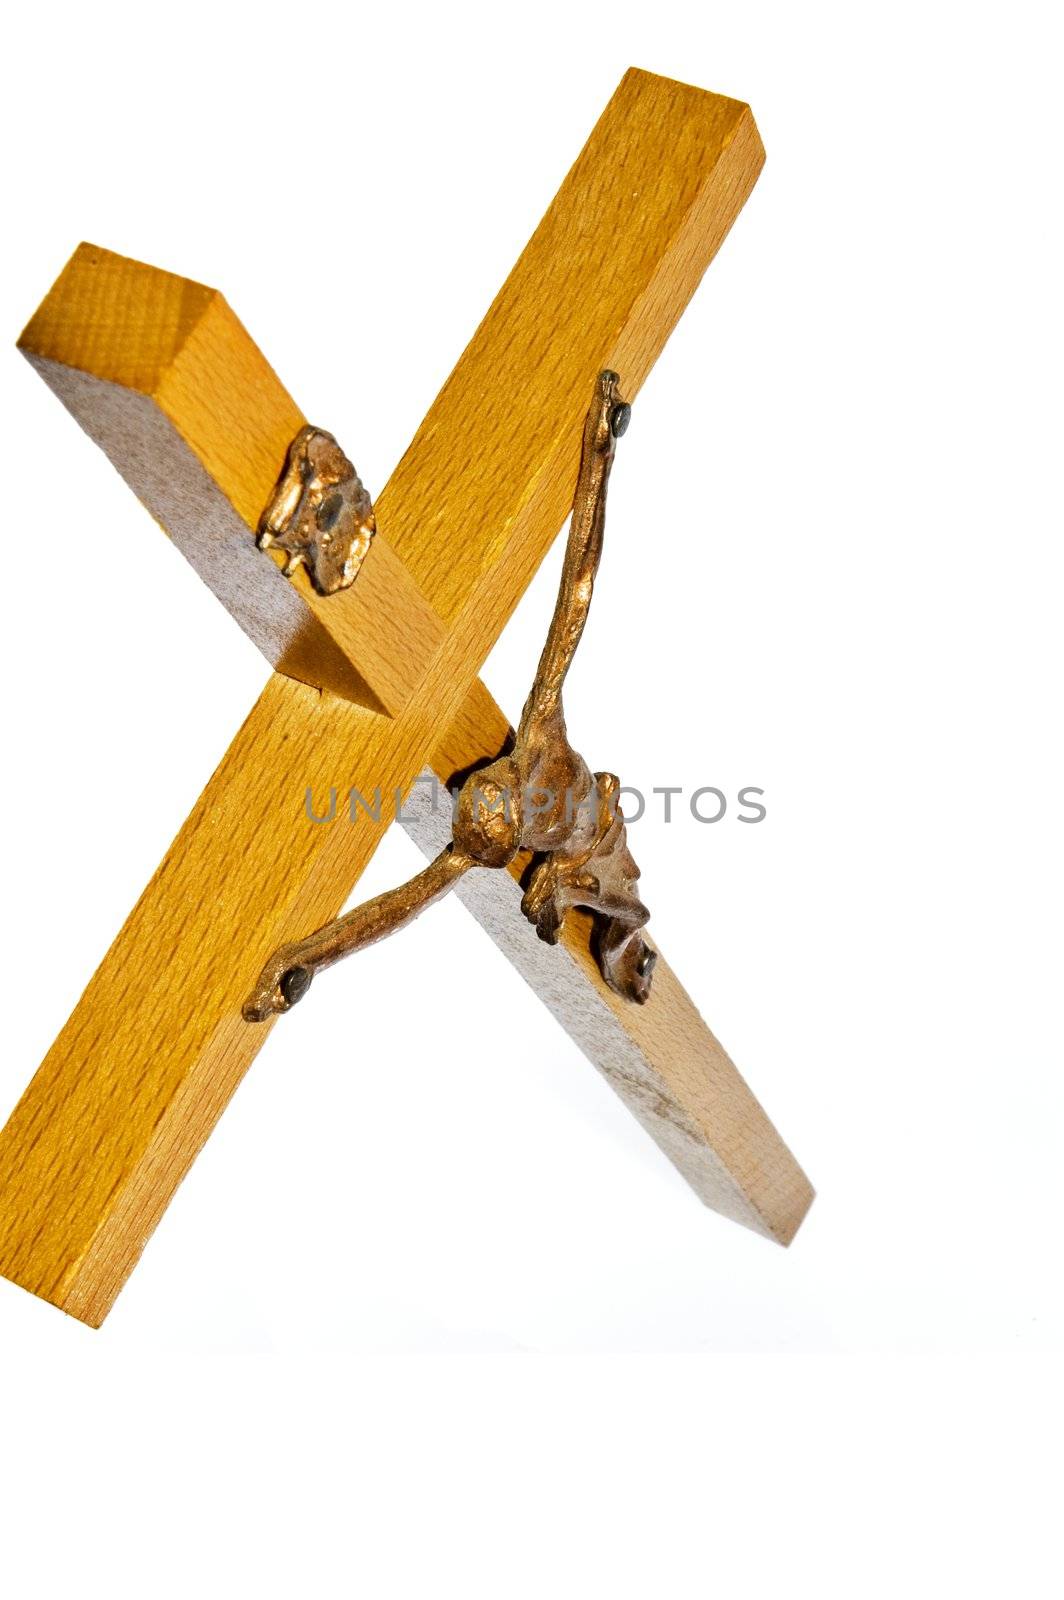 Wooden cross isolated over white background